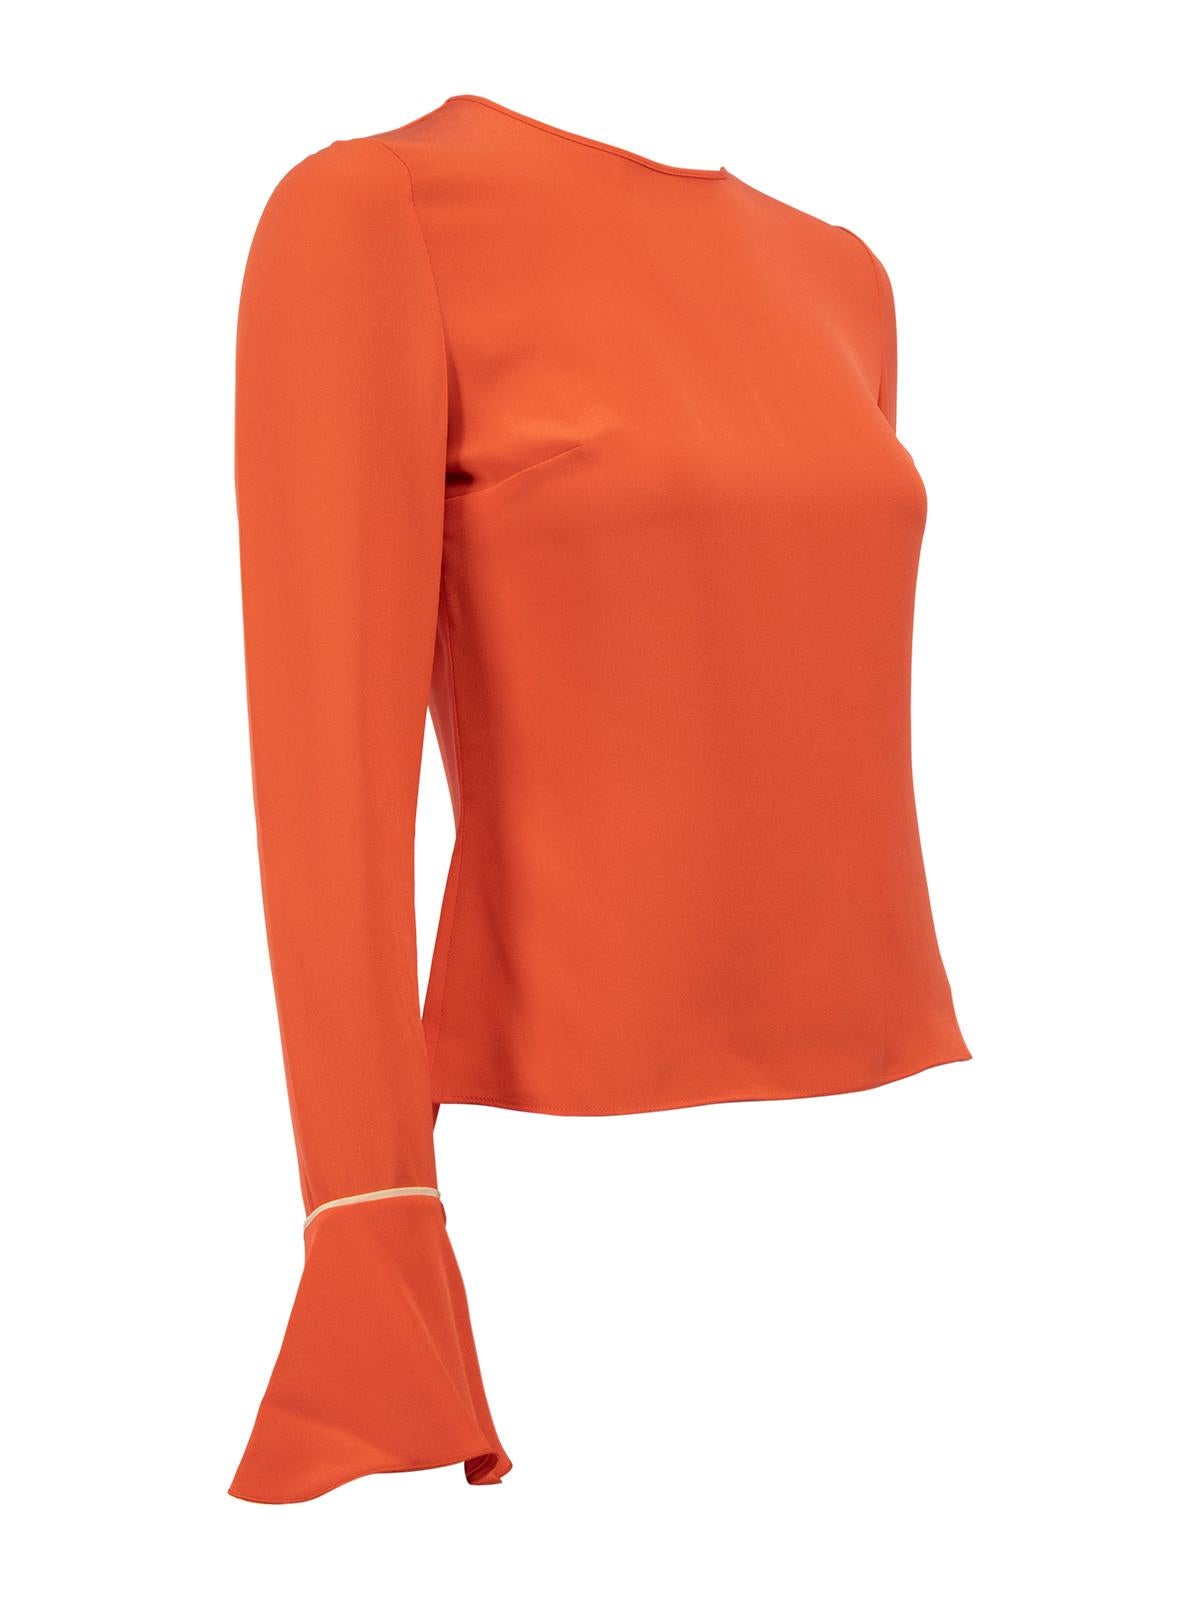 CONDITION is Never worn, with tags. No visible wear to top is evident on this used Roksanda designer resale item. 
 
 Details
  Coral
 Silk
 Top
 Long bell sleeve
 Round neckline
 Ruffled cuffs
 Back zip fastening with hook and eye
 
 
 Made in